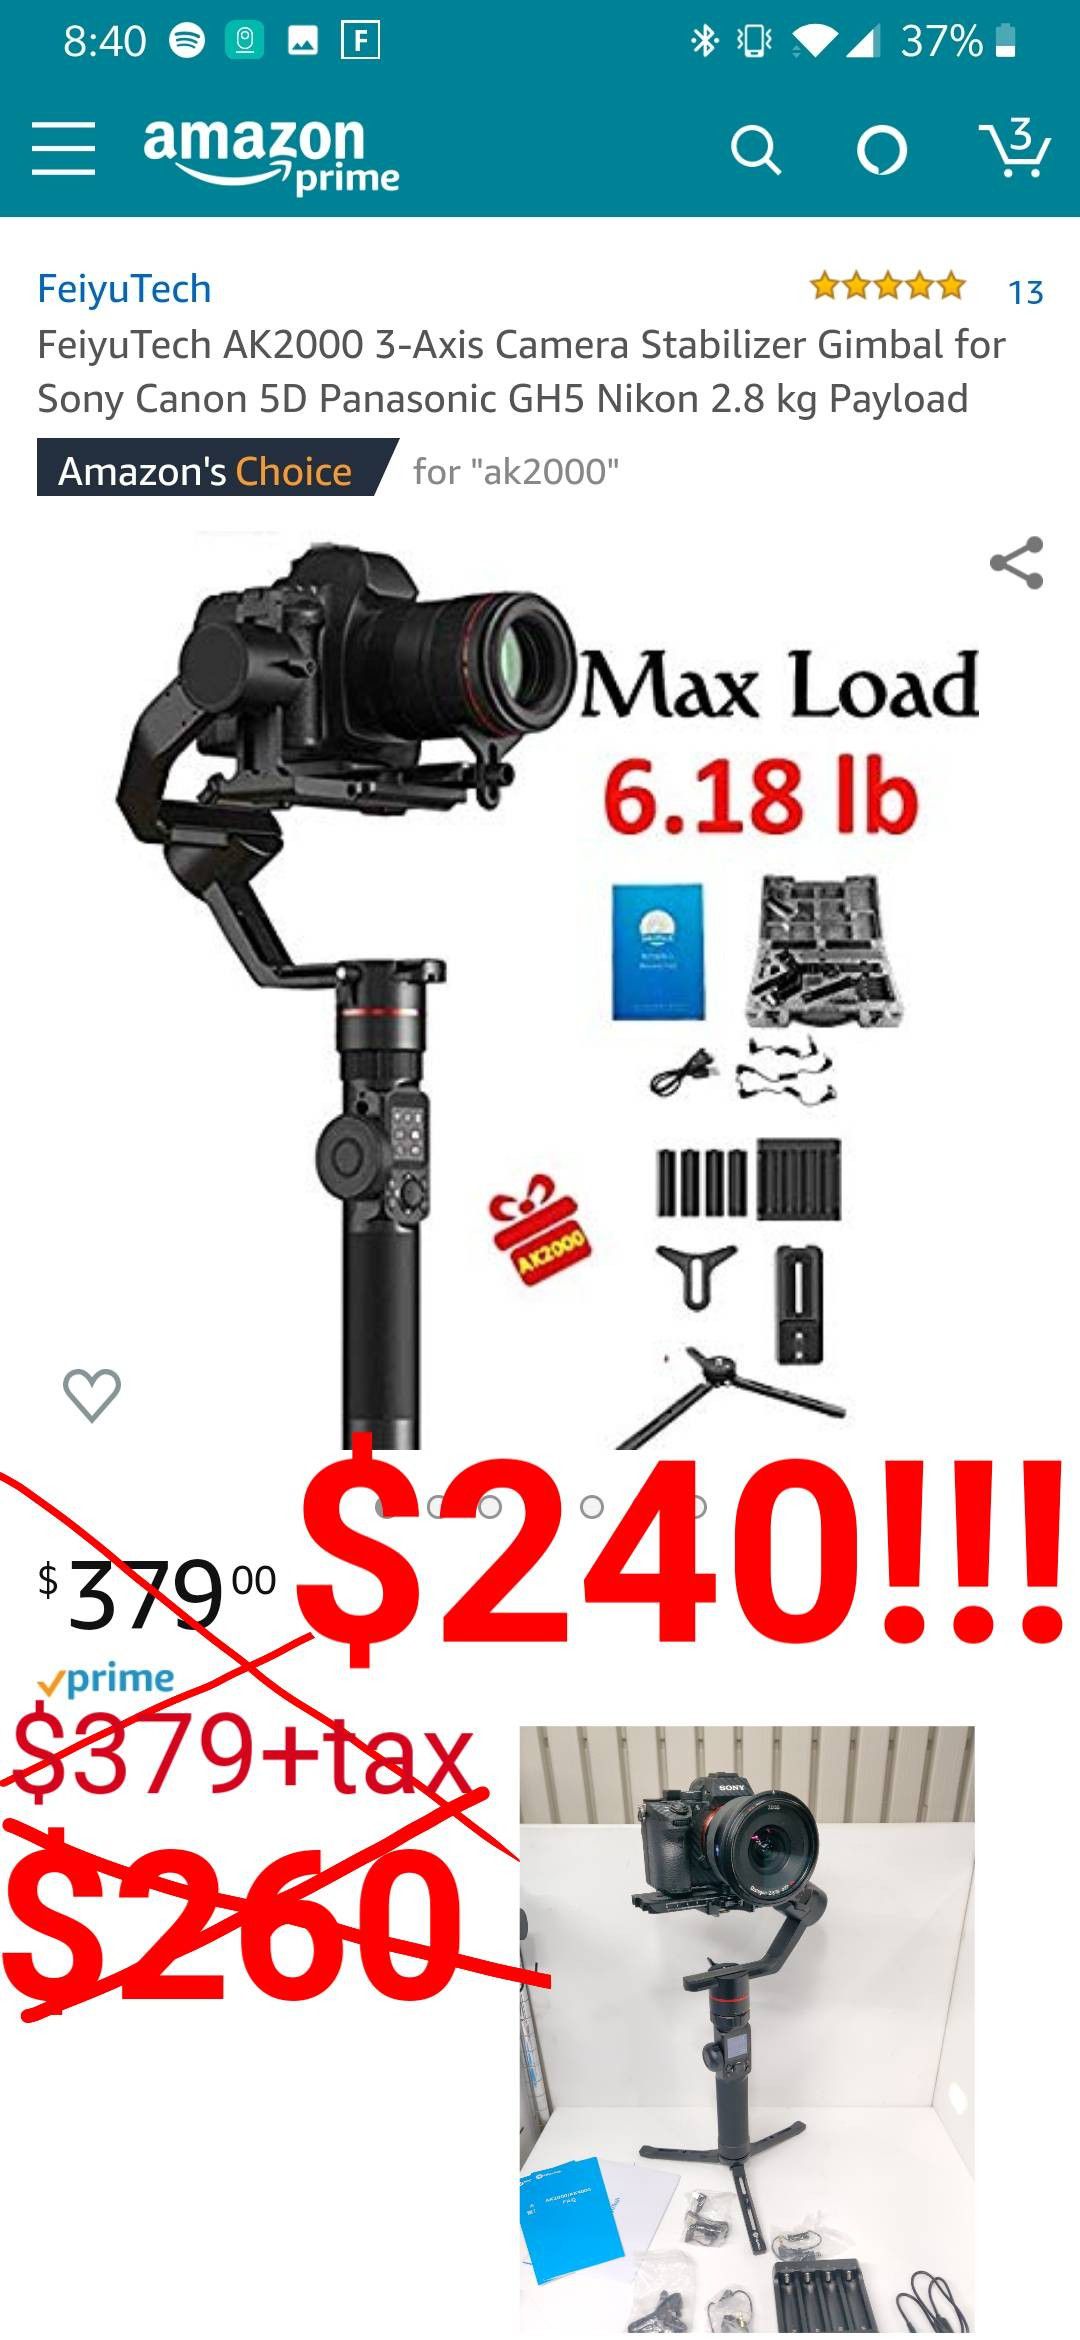 DSLR camera gimbal stabilizer 6.18lb max load on, 3 axis, FeiyuTech ak2000 gimbal for Nikon, Panasonic Lumix, canon, Sony cameras and more